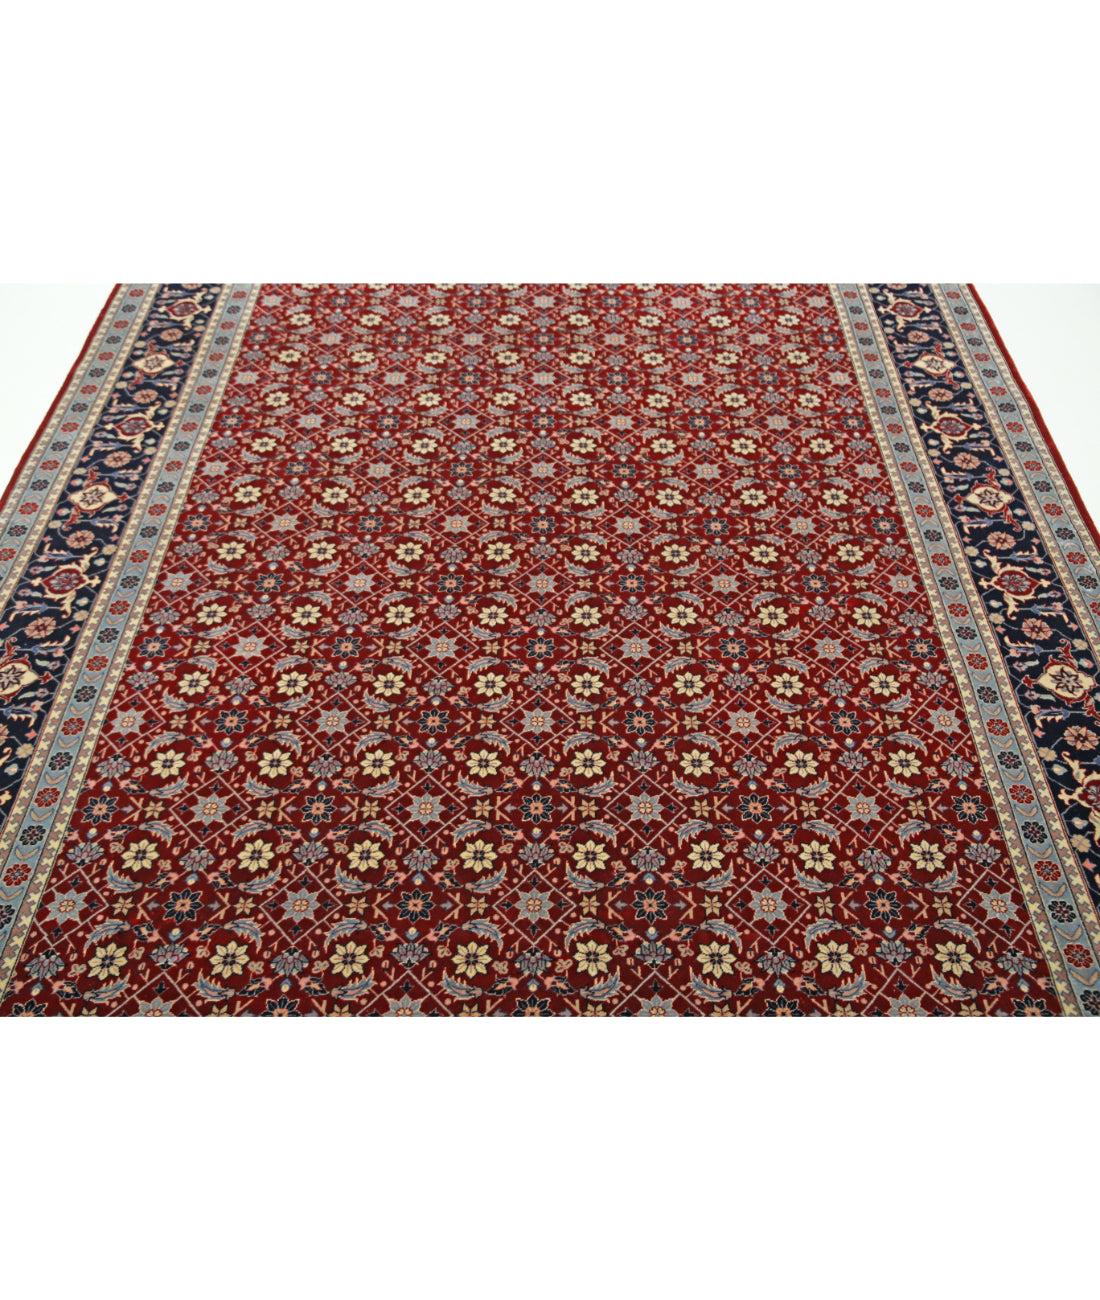 Heritage 6' 7" X 9' 10" Hand-Knotted Wool Rug 6' 7" X 9' 10" (201 X 300) / Red / Blue